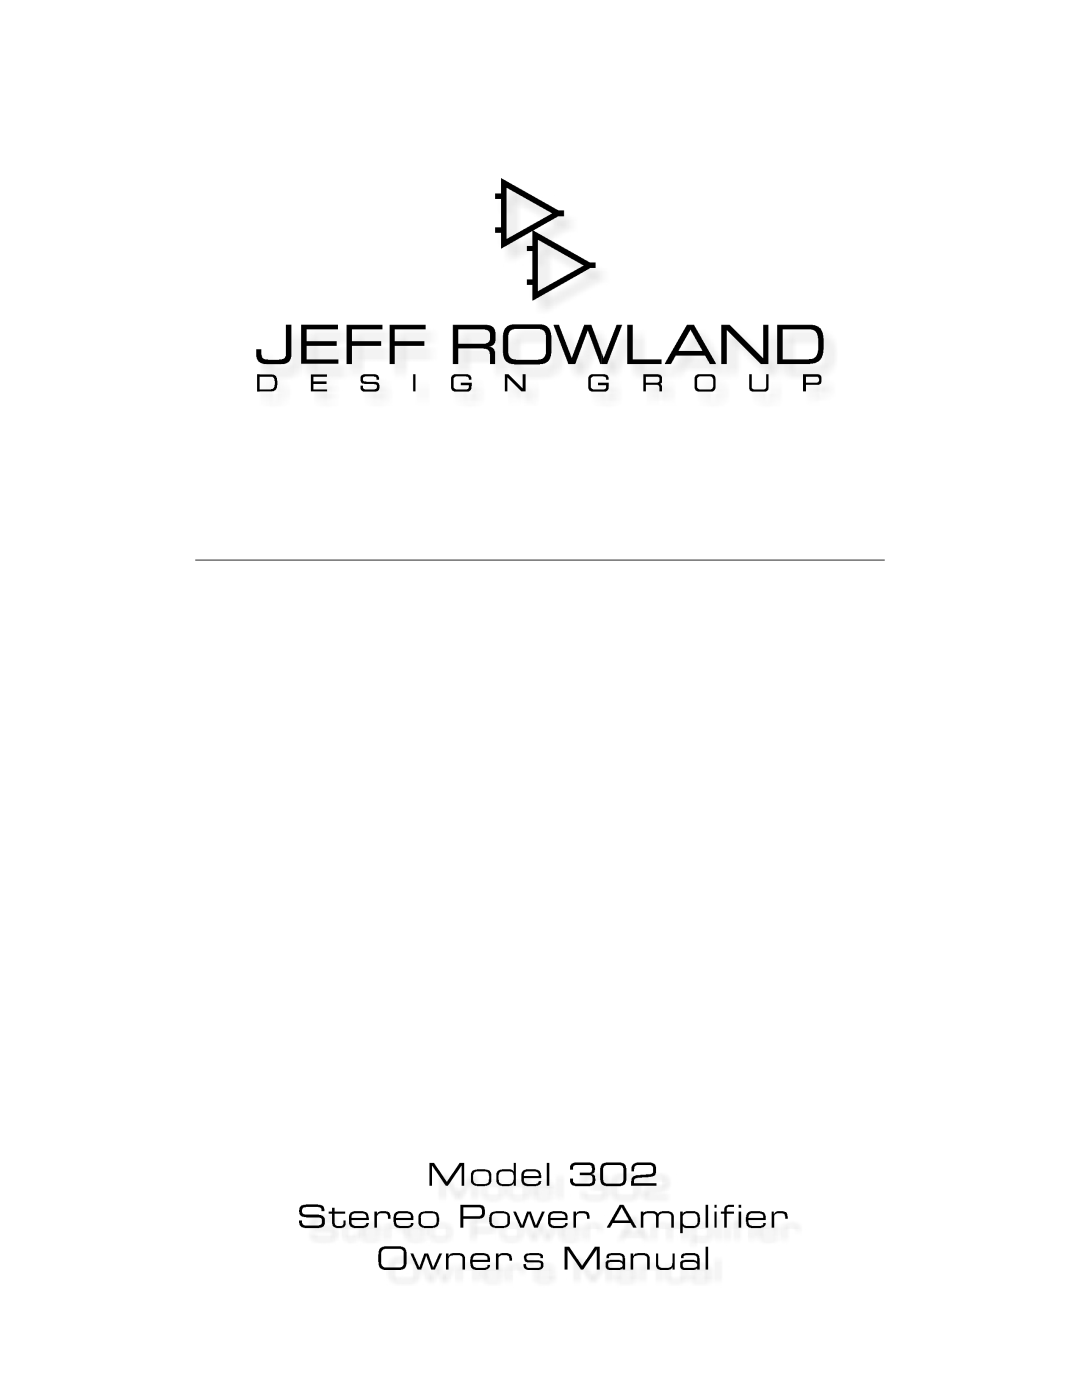 Jeff Rowland Design Group 302 owner manual 